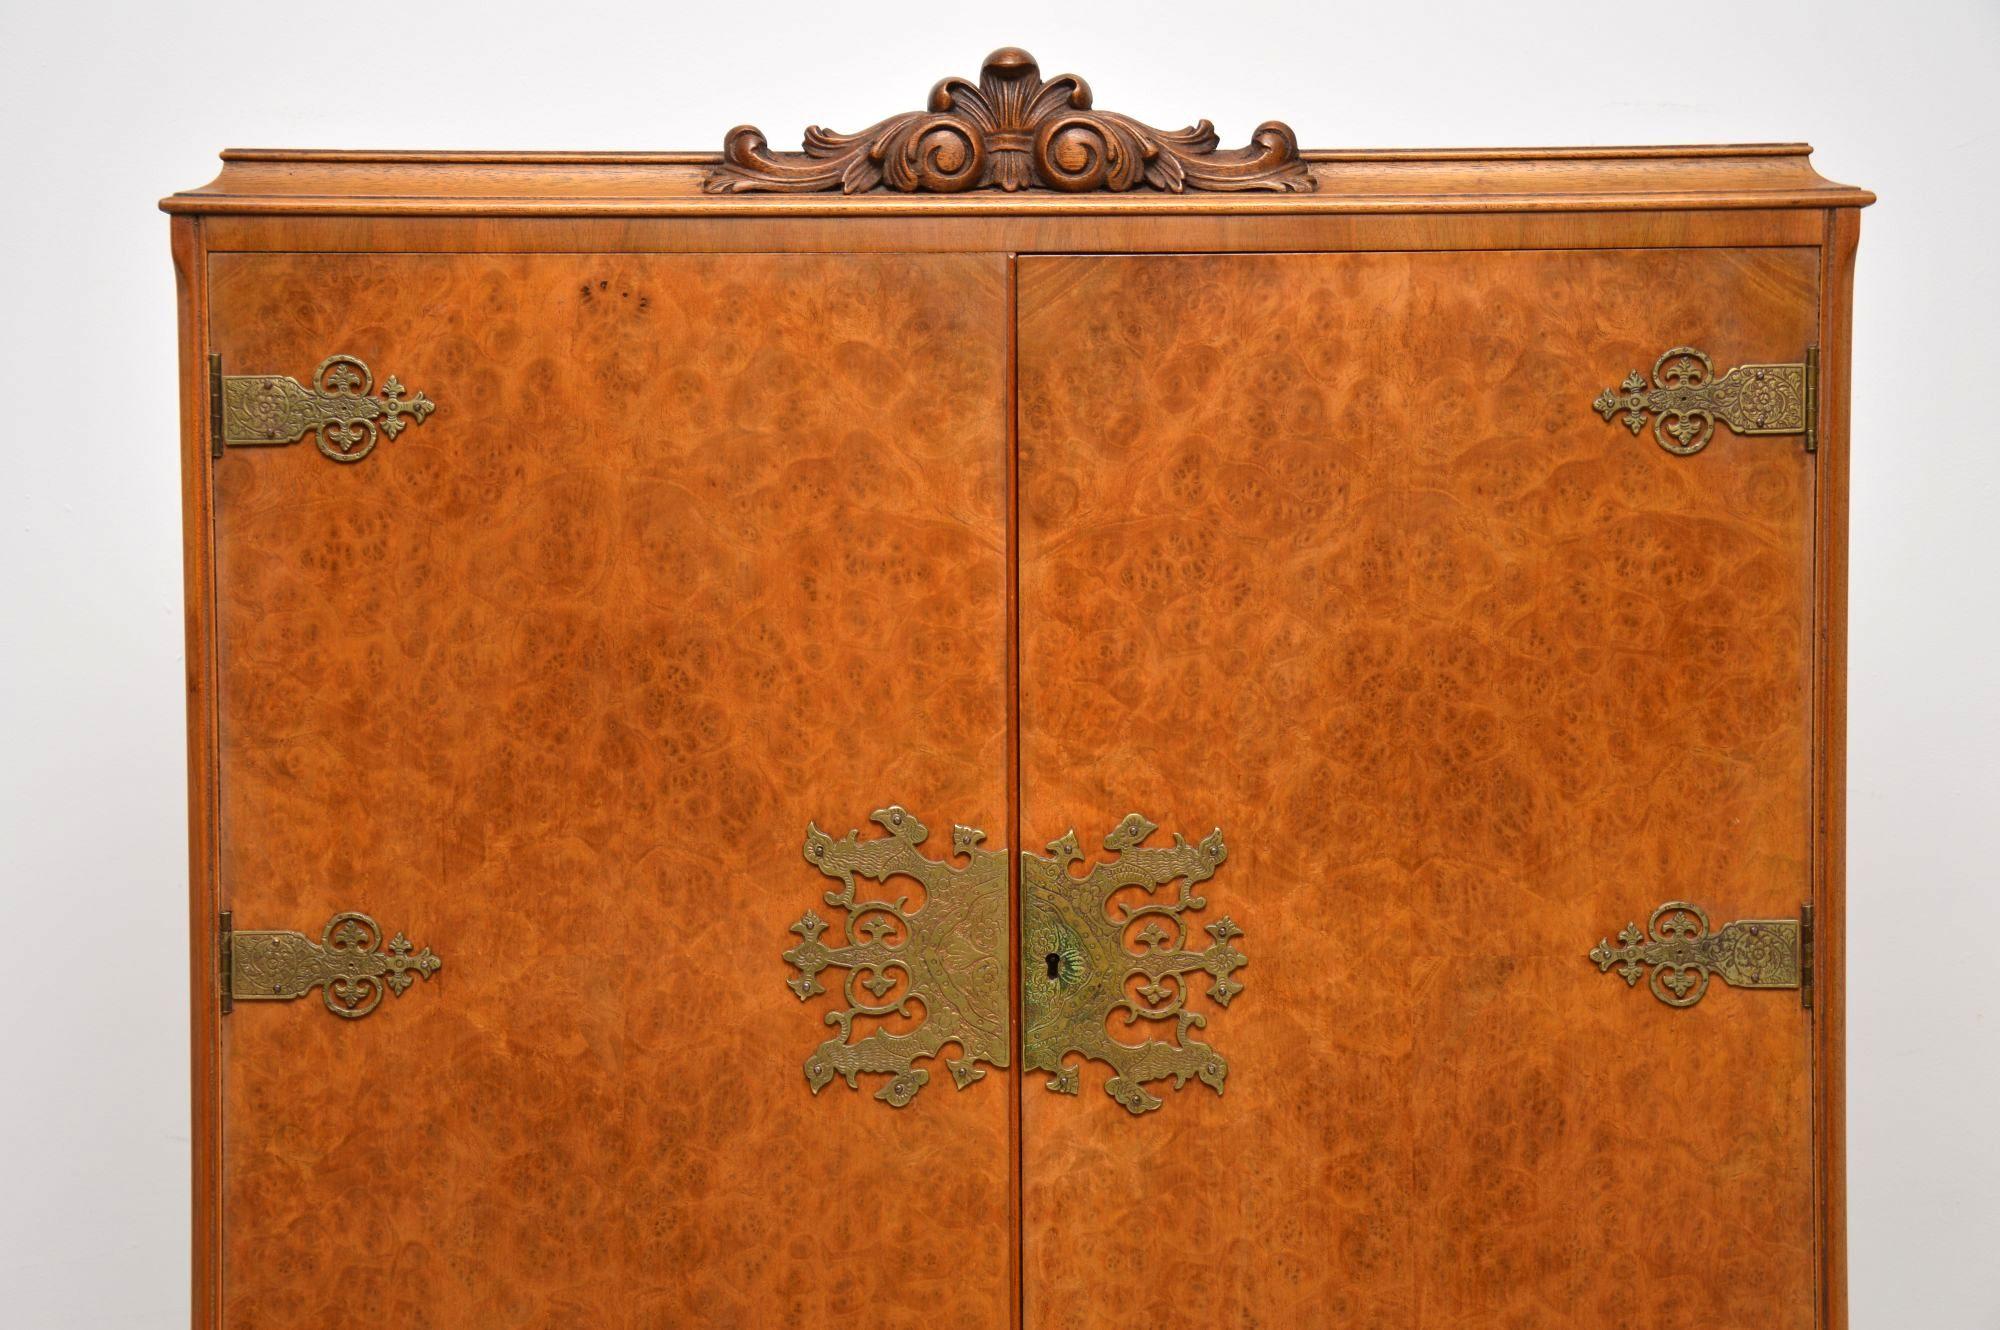 Antique Queen Anne style burr walnut cocktail cabinet in good condition and dating to around the 1930s period. It’s beautifully carved above the doors and between all the legs, which are also carved on the tops. The doors have very decorative etched